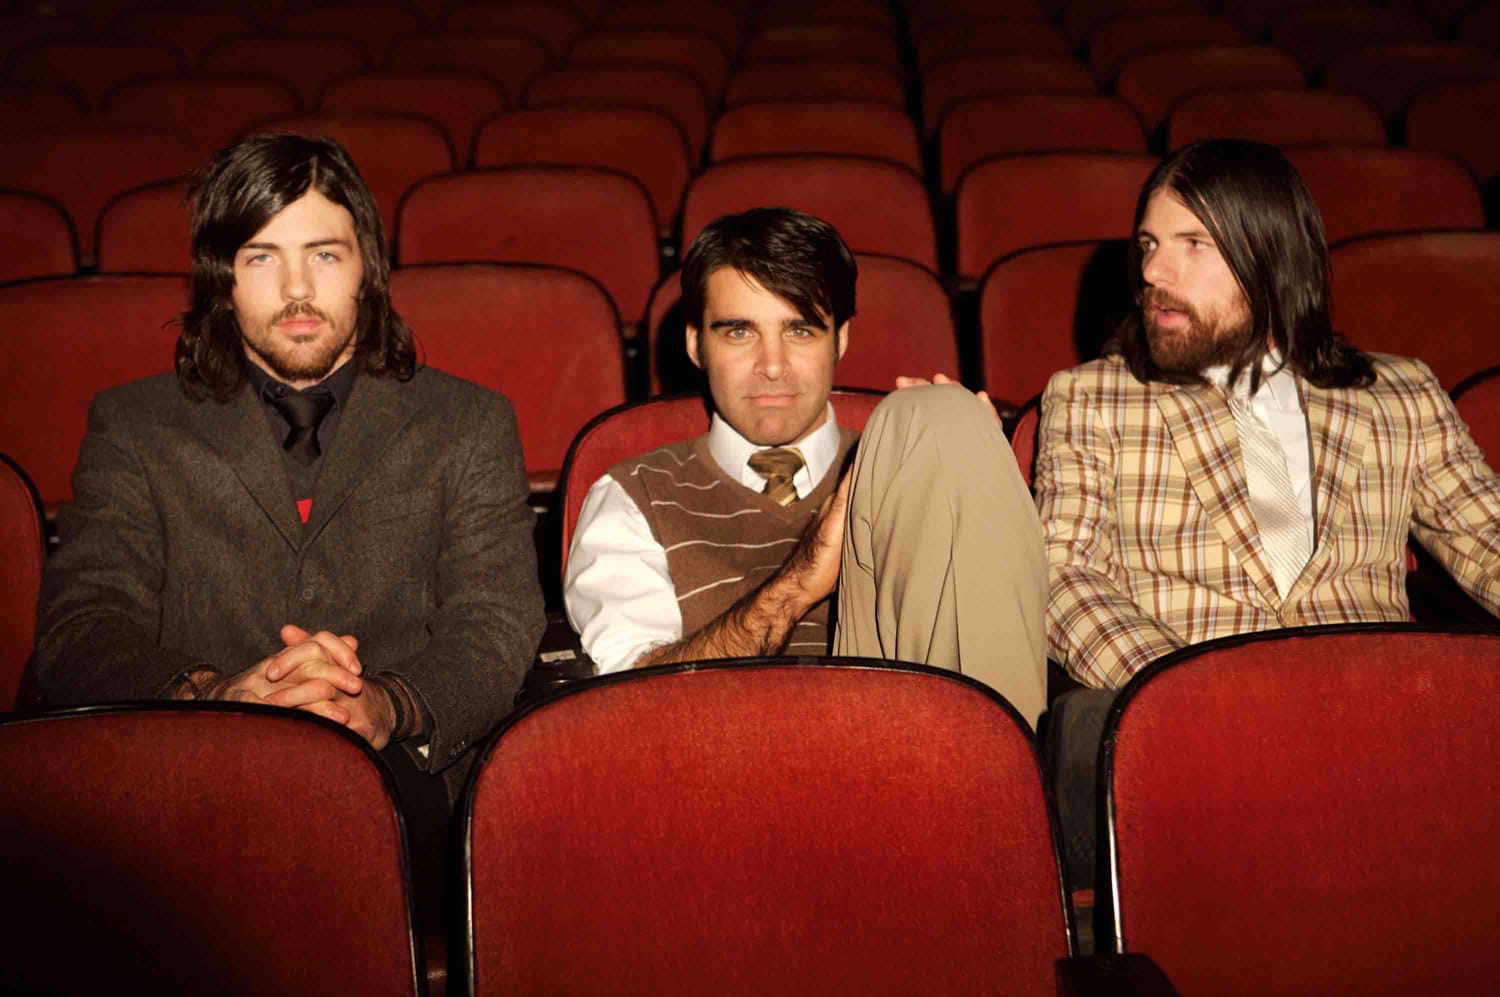 The Avett Brothers will play Edgefield Amphitheater in Troutdale, Ore., at 7 p.m. Aug.